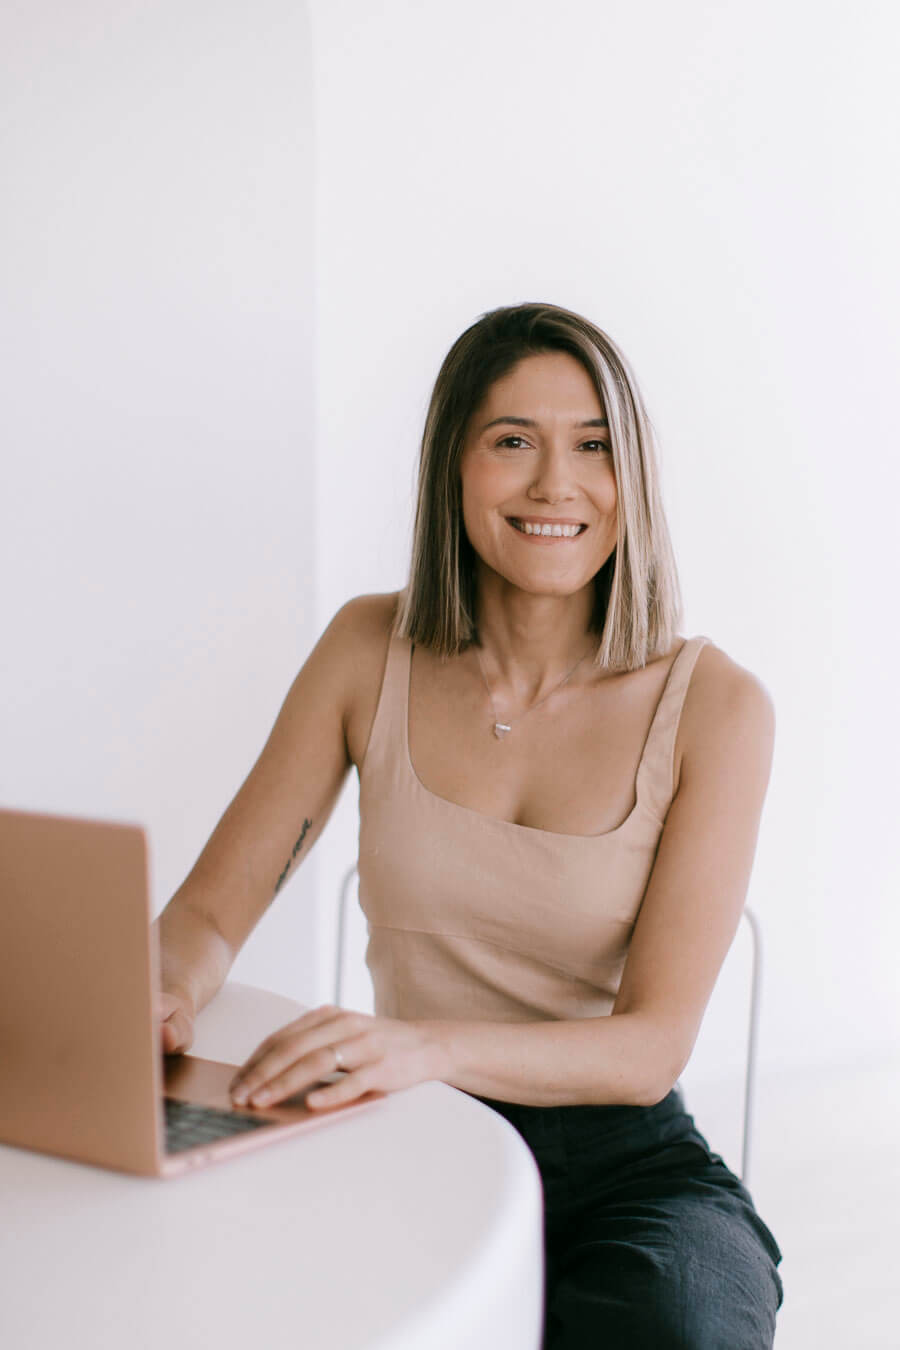 Sera Wilkie, Head of Marketing at DreamCube Productions in Melbourne, sits at a white table with her laptop, smiling warmly at the camera. She projects a professional yet friendly image, dressed in a sleeveless top and black pants, in a bright and minimalistic setting.